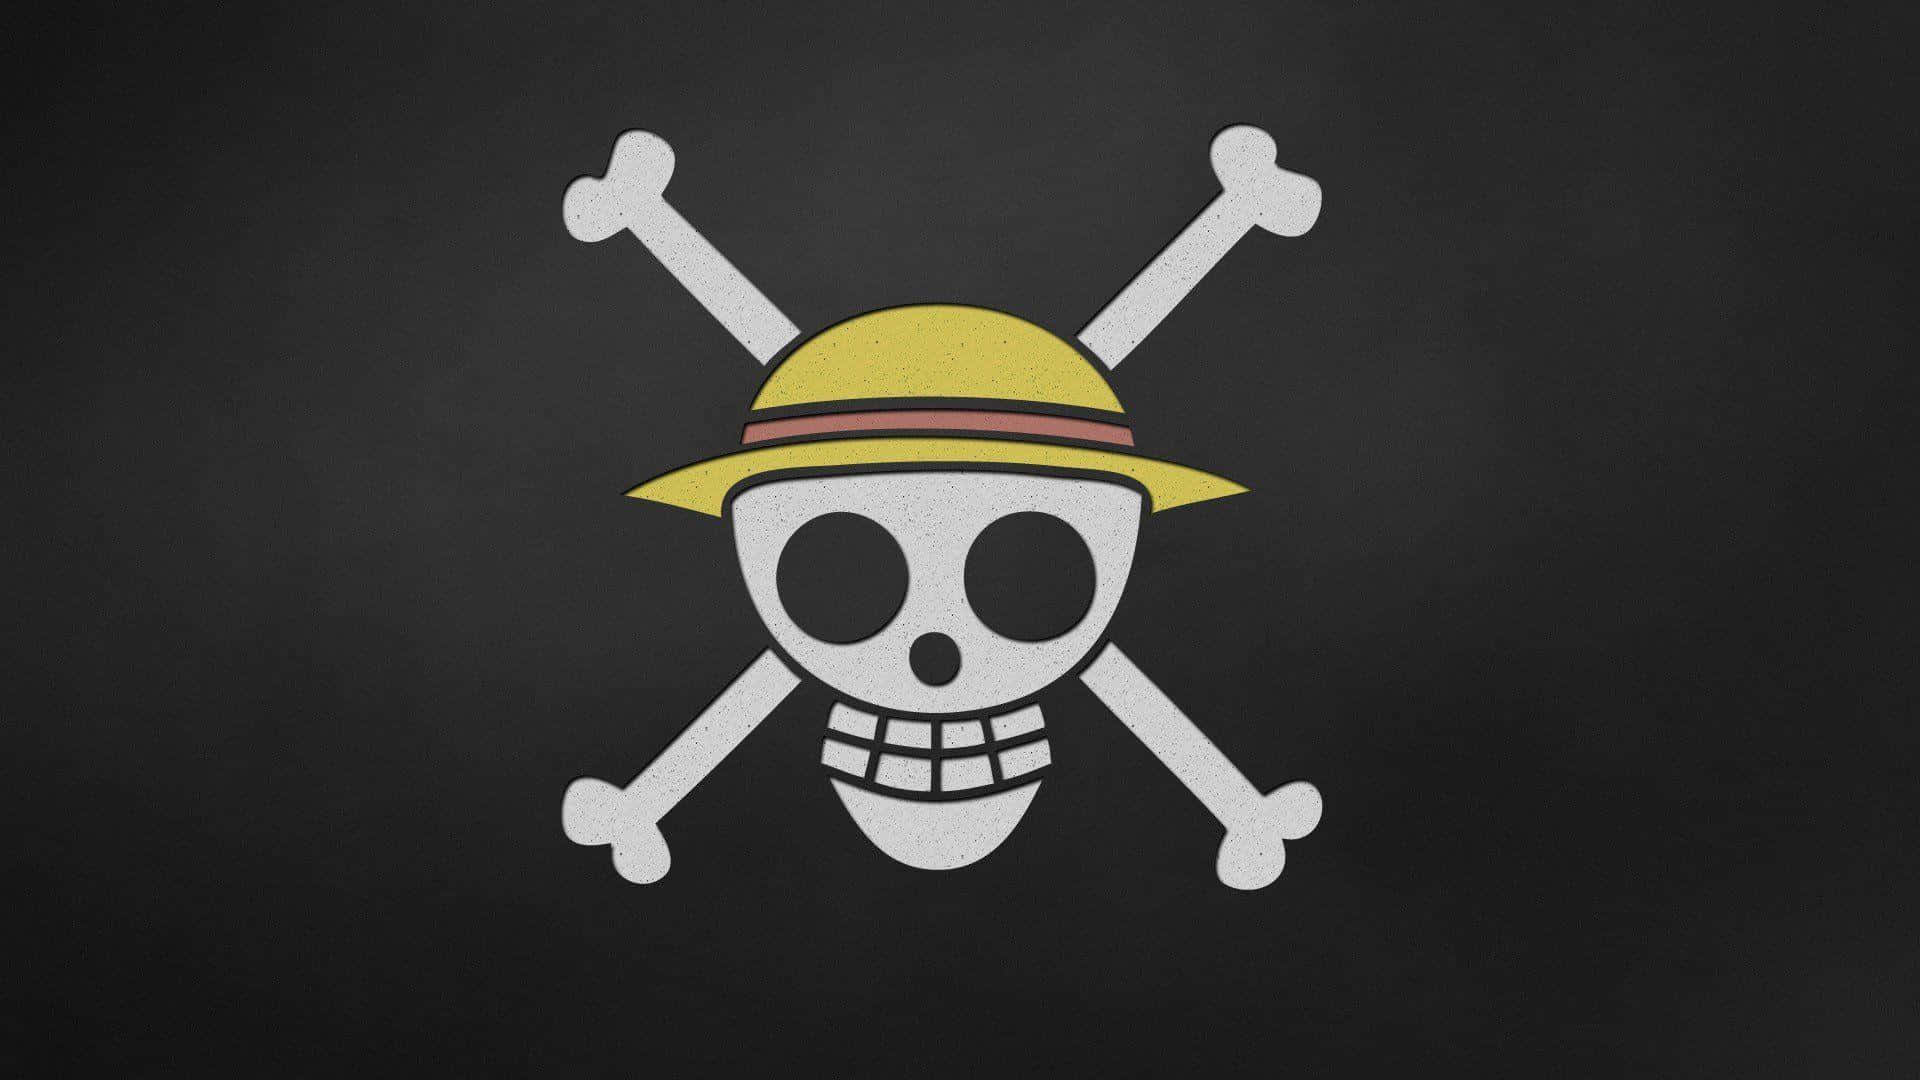 Join the Straw Hat Pirates adventure! Wallpaper